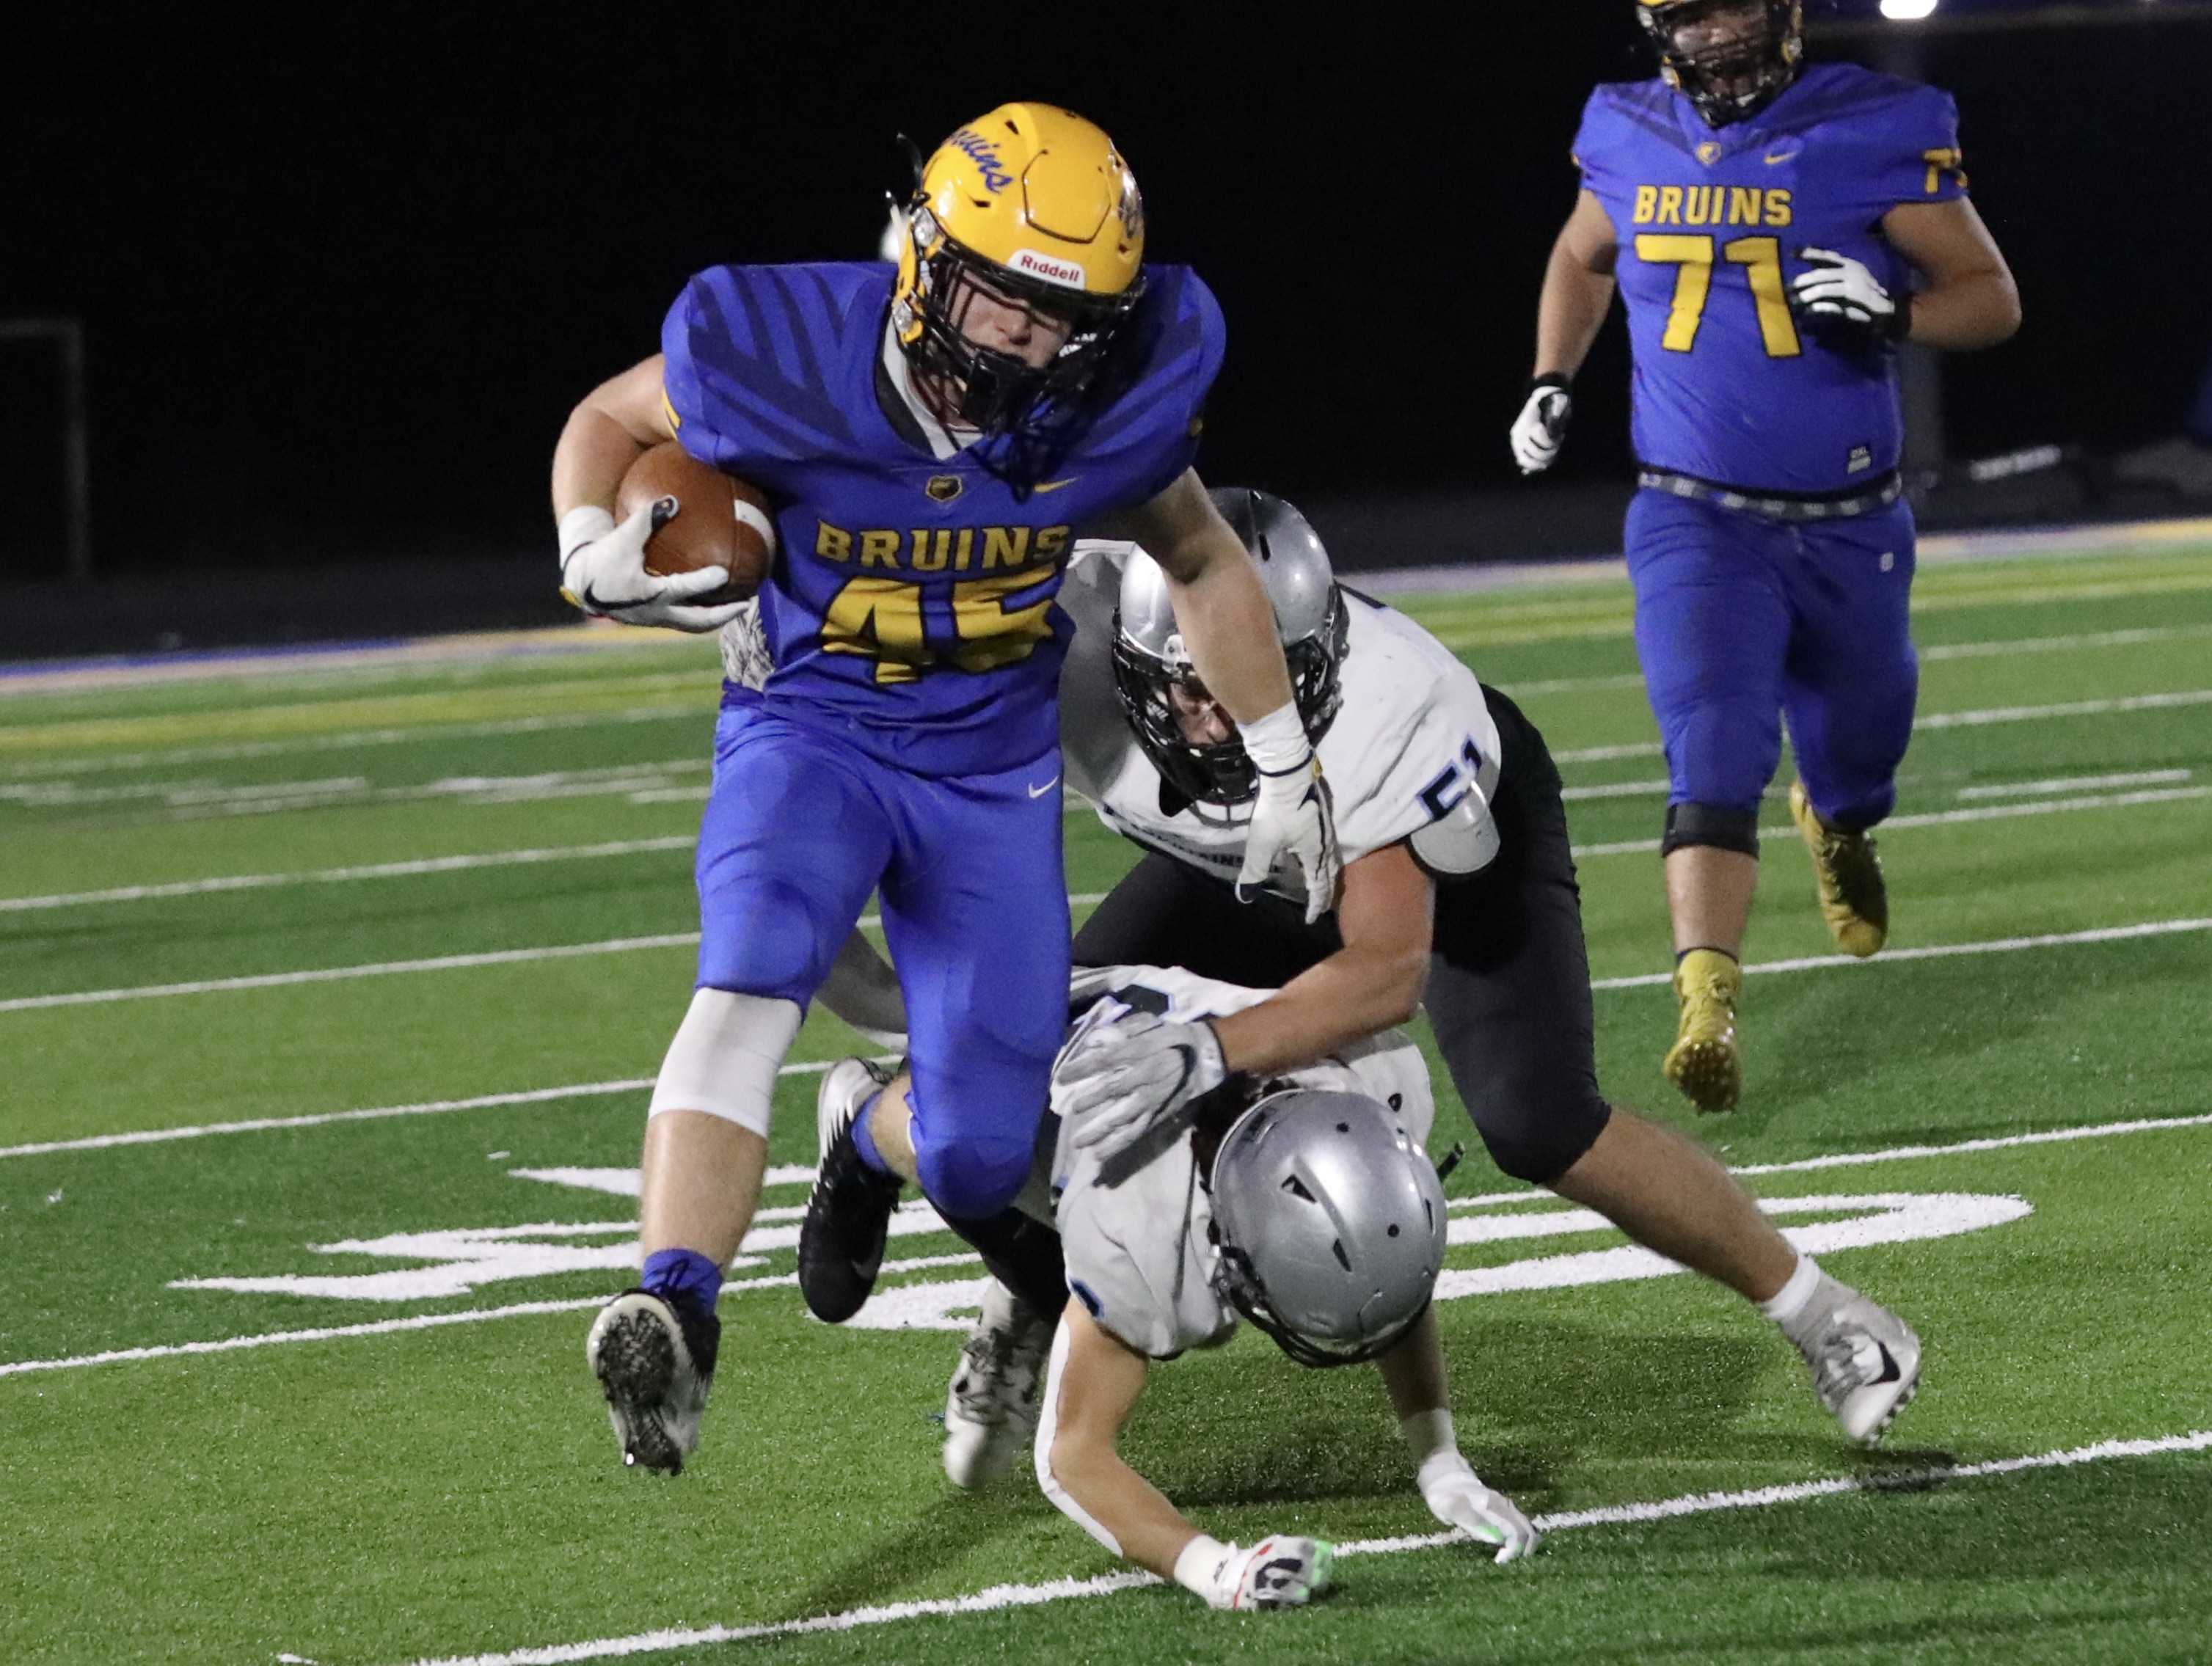 Barlow's Andrew Collins evades two Mountainside tacklers on his way to a 40-yard run on a screen pass. (Norm Maves Jr.)